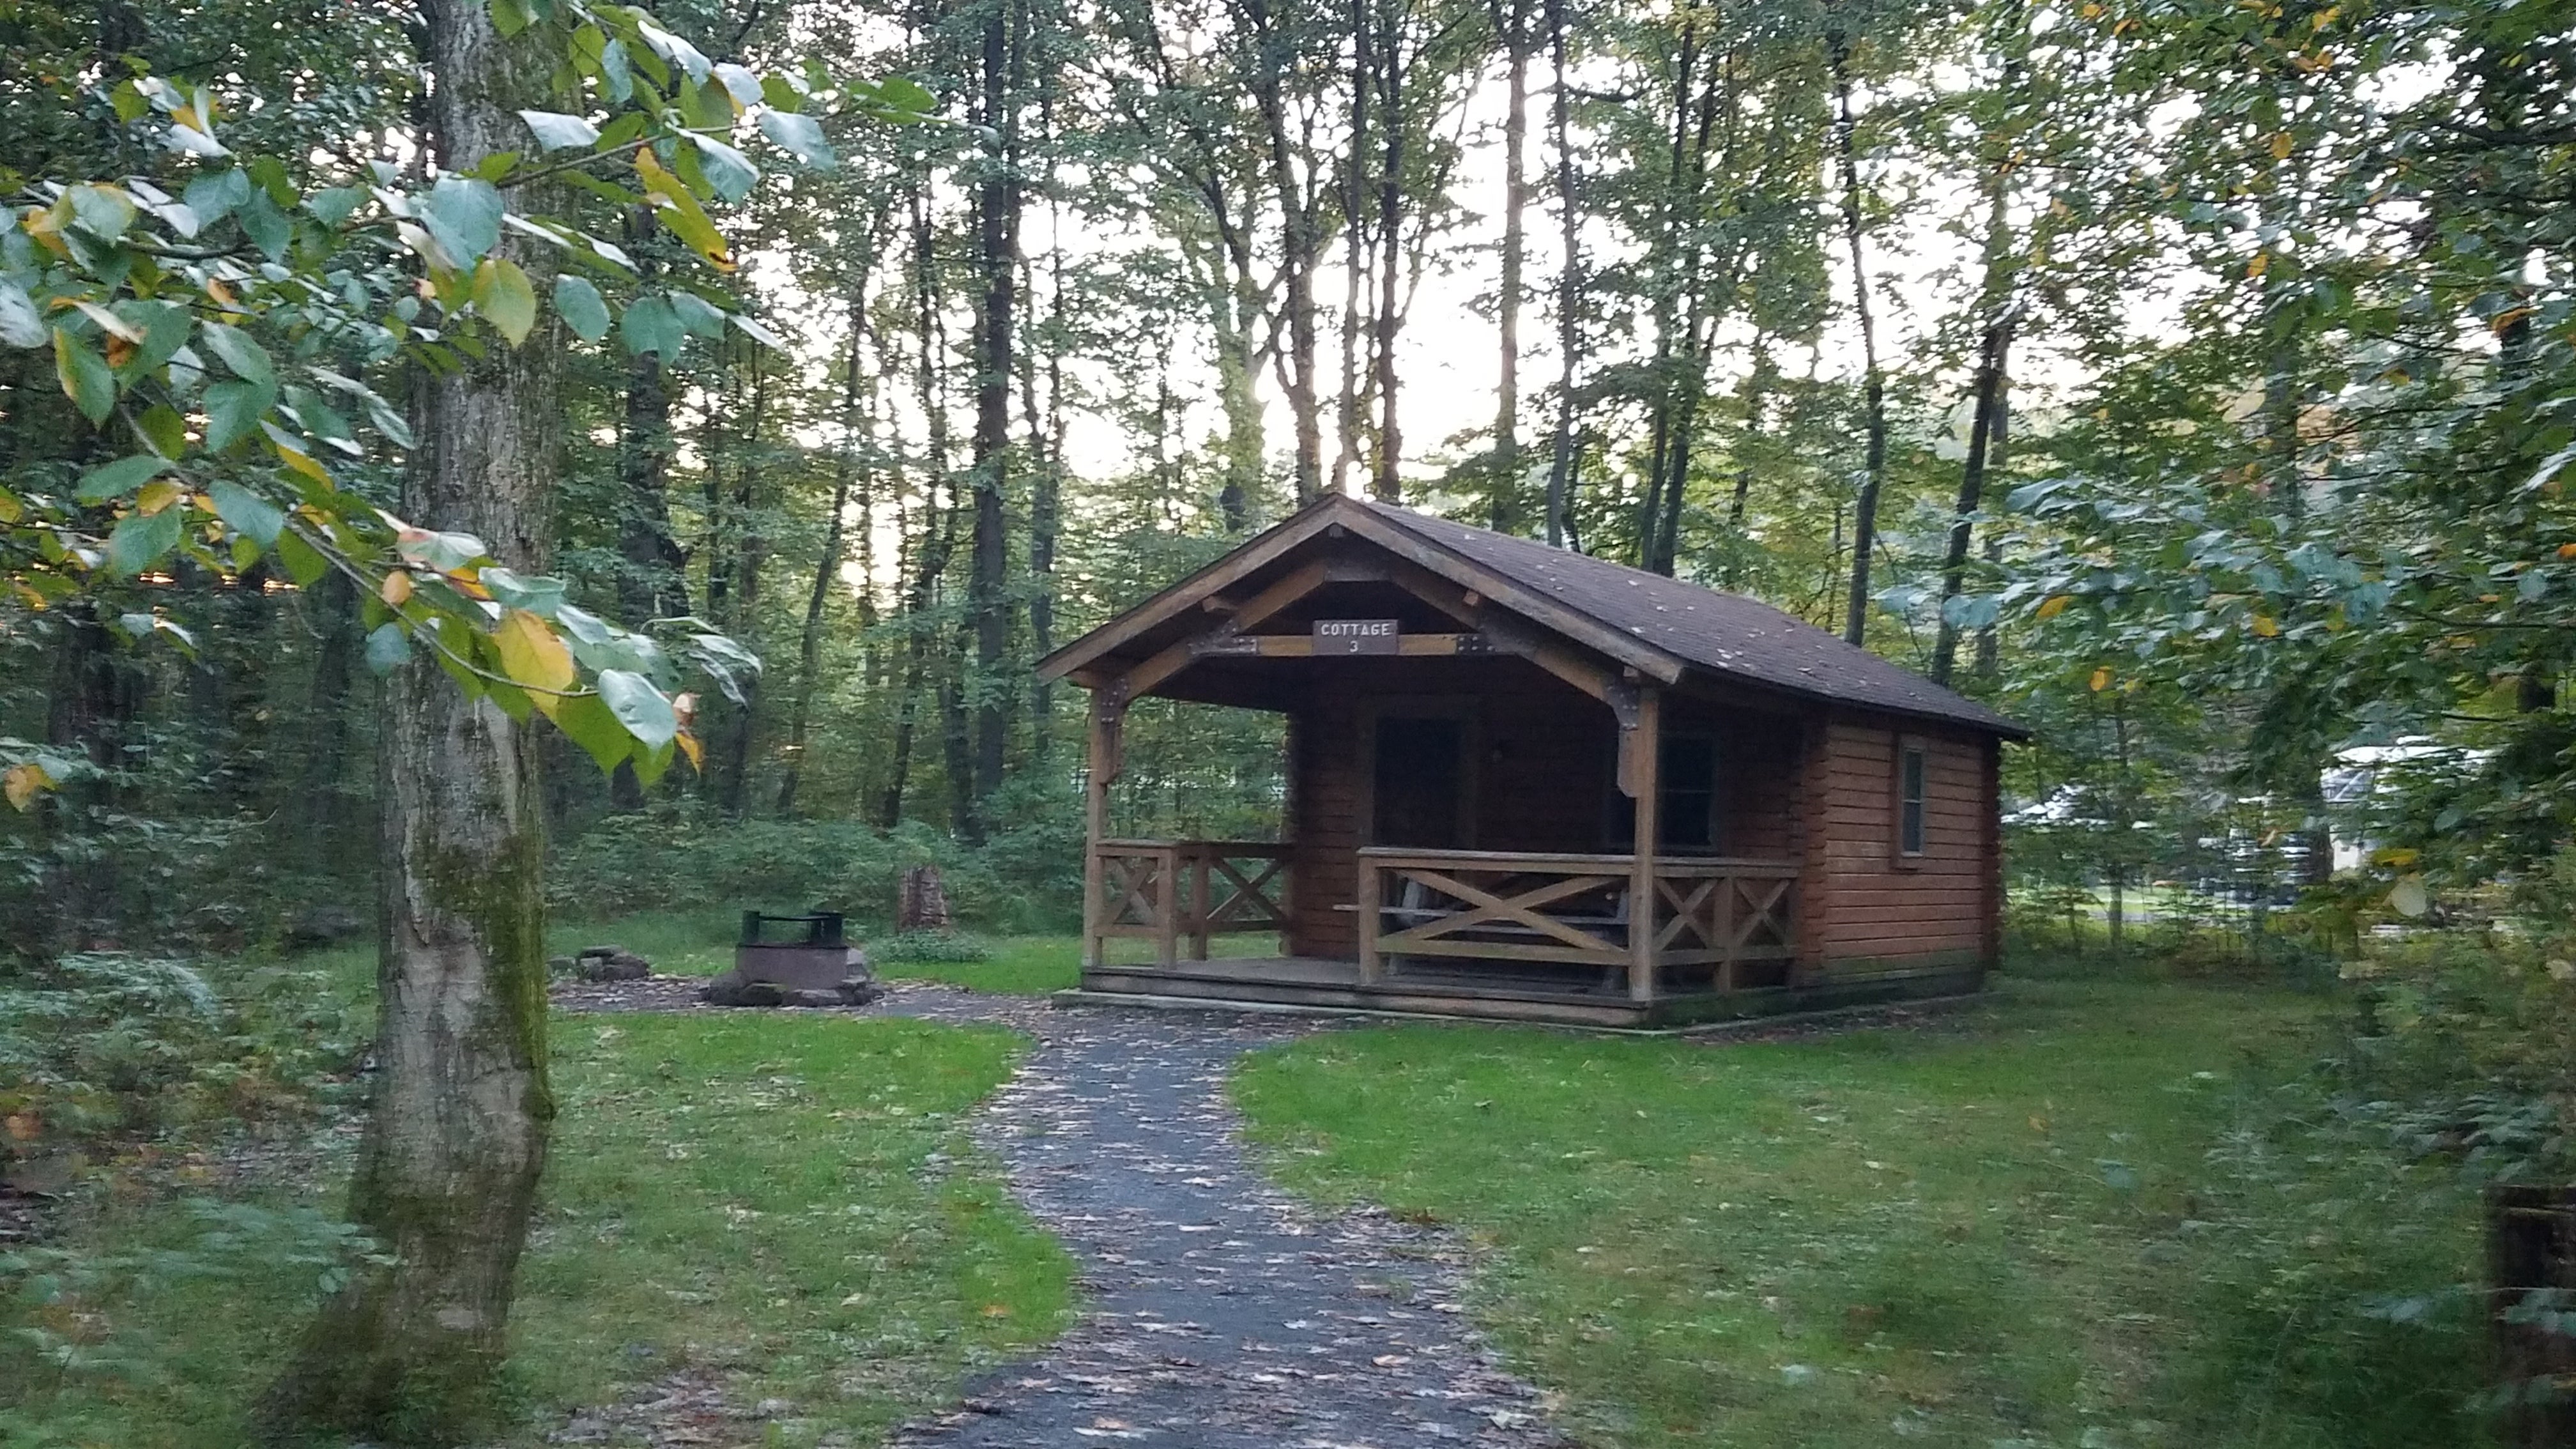 One of the camping cabins near the entrance to Loop C.